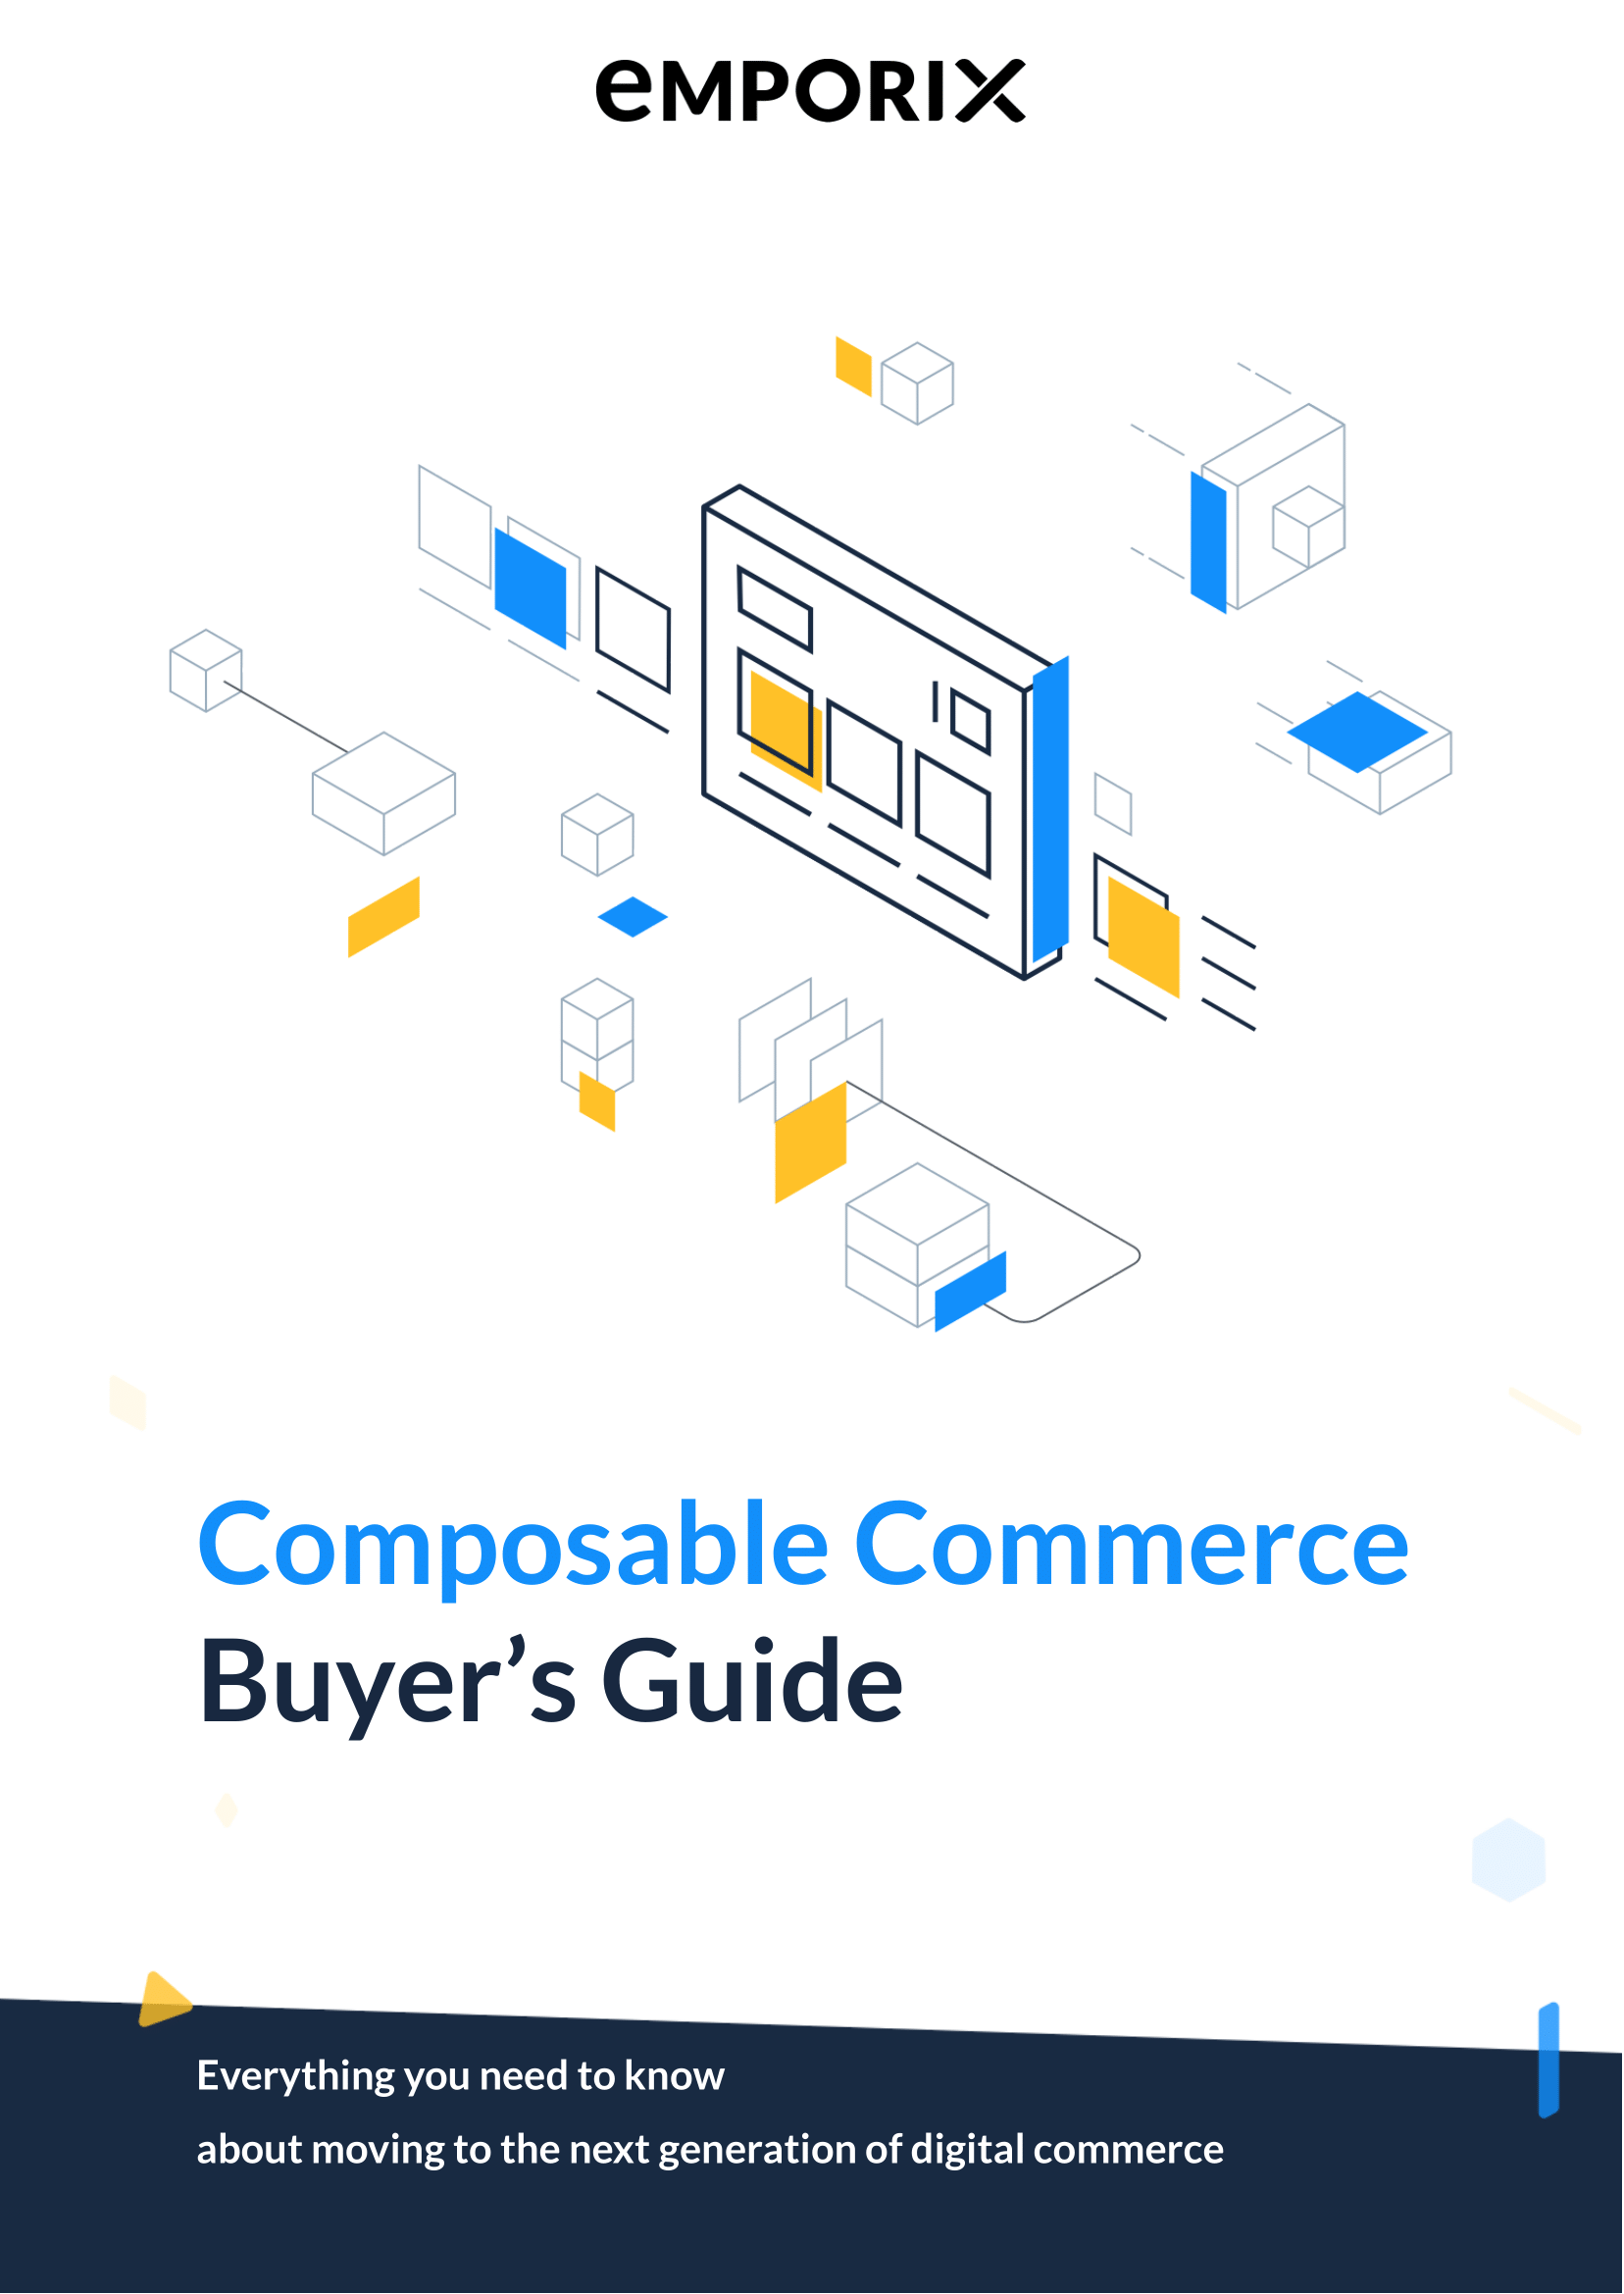 Copy of Composable Commerce Buyer’s Guide Cover-1